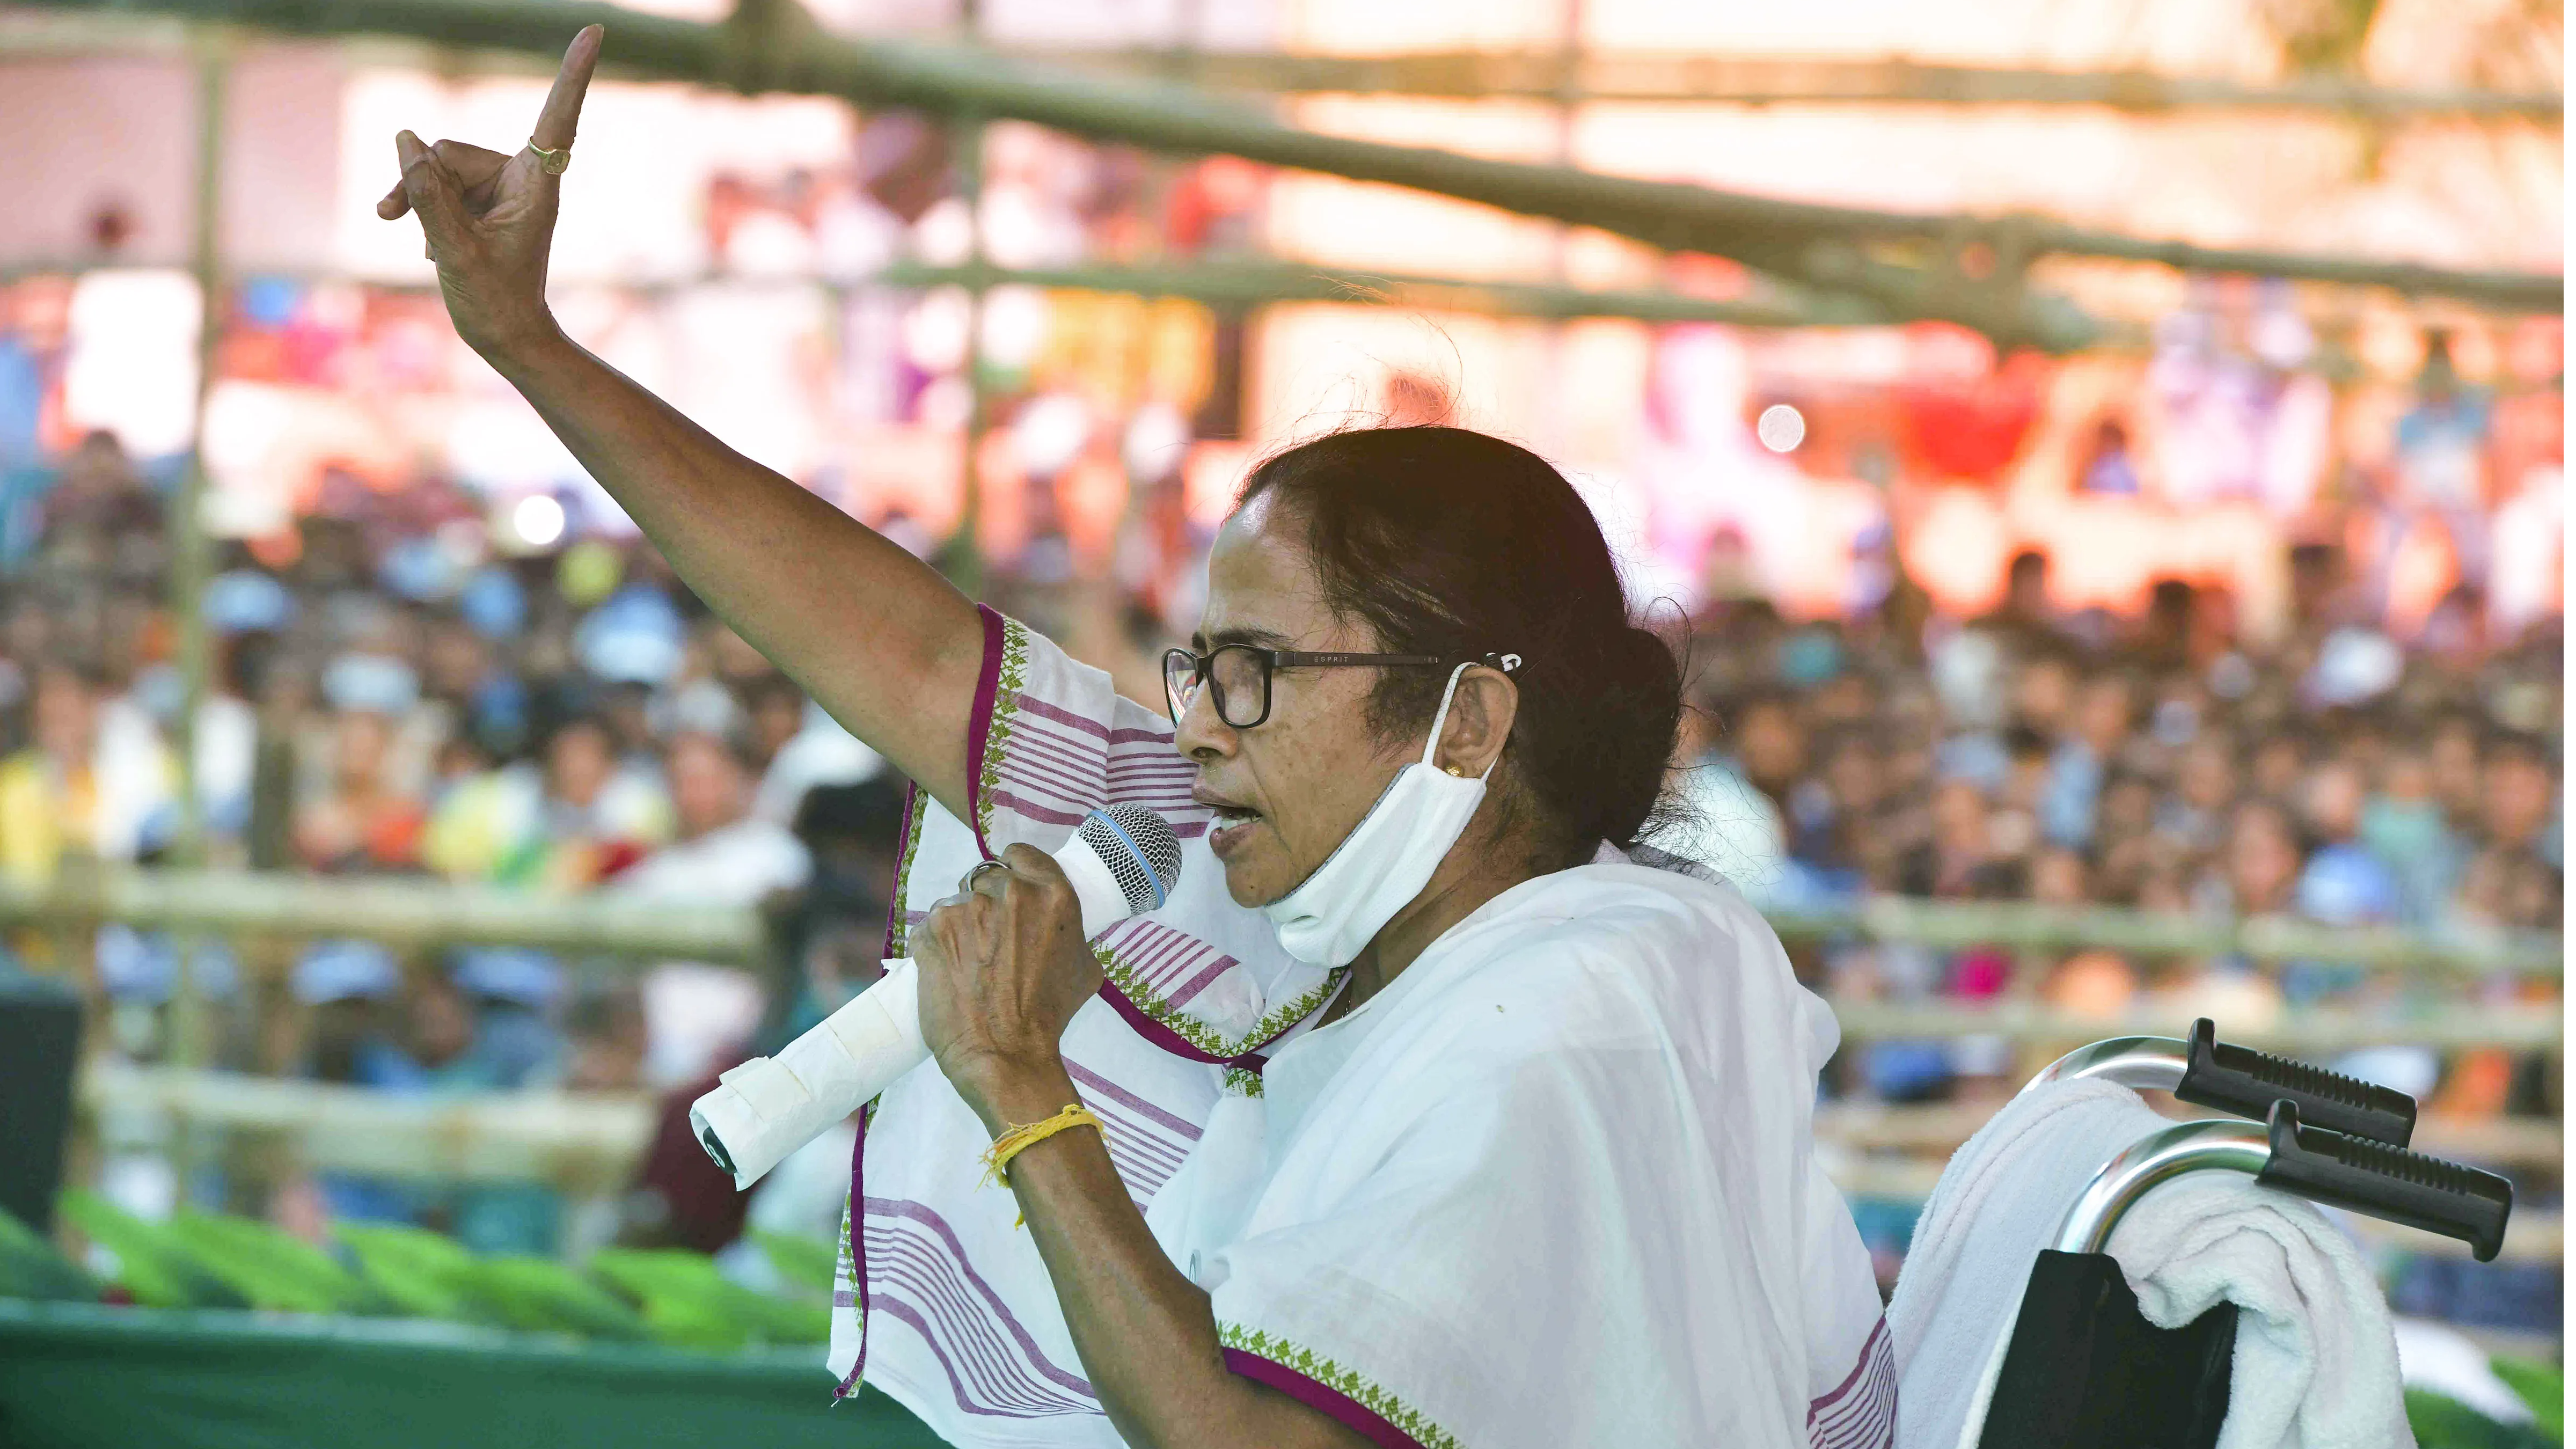 CRPF harassing voters in Bengal at Amit Shah’s behest: Mamata Banerjee